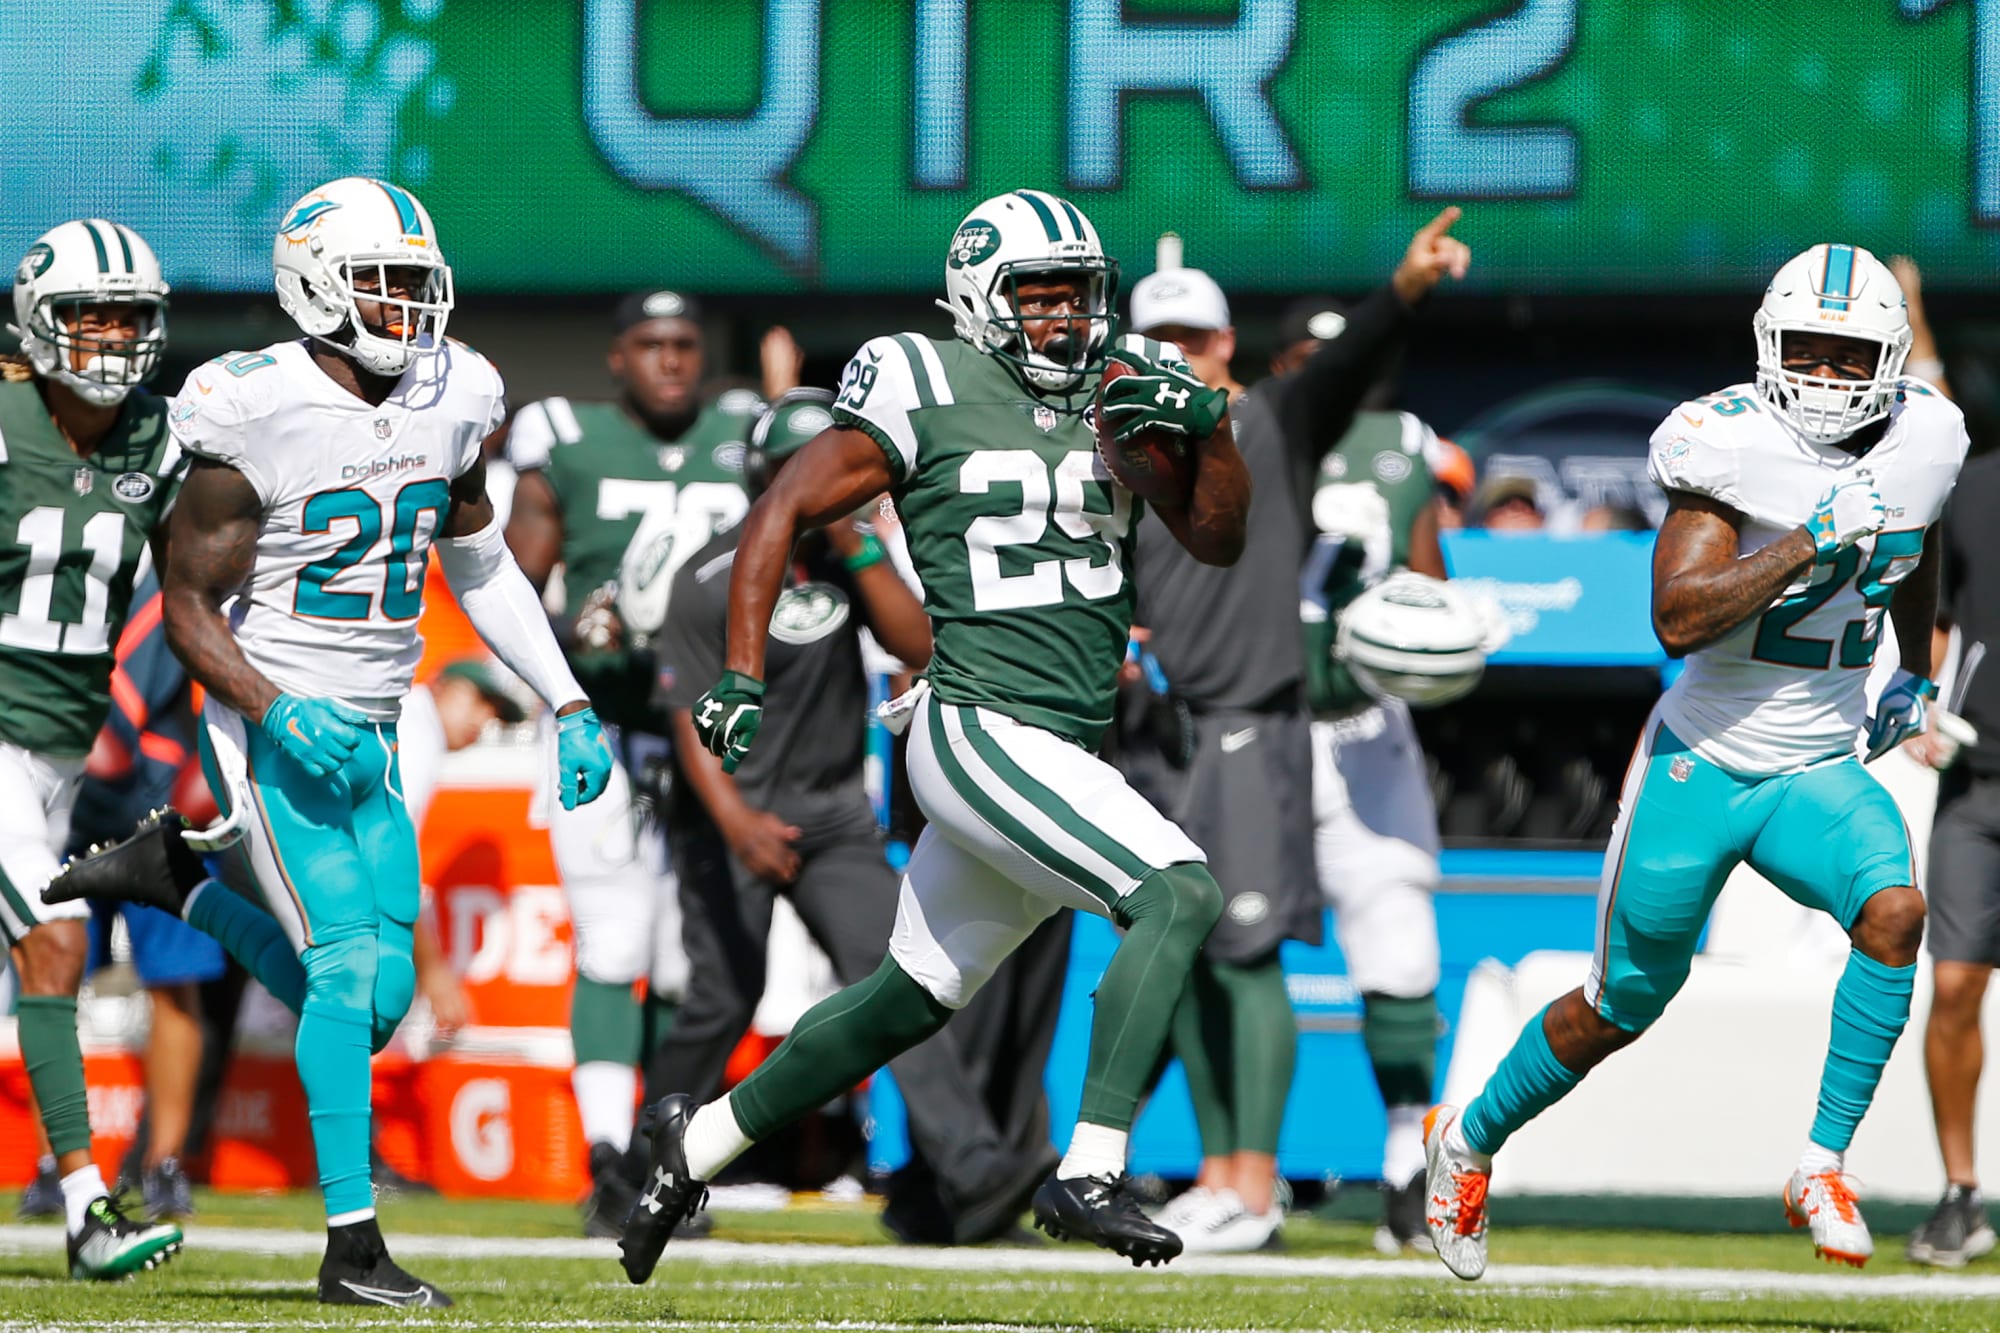 Dolphins vs. Jets Highlights, game tracker and more